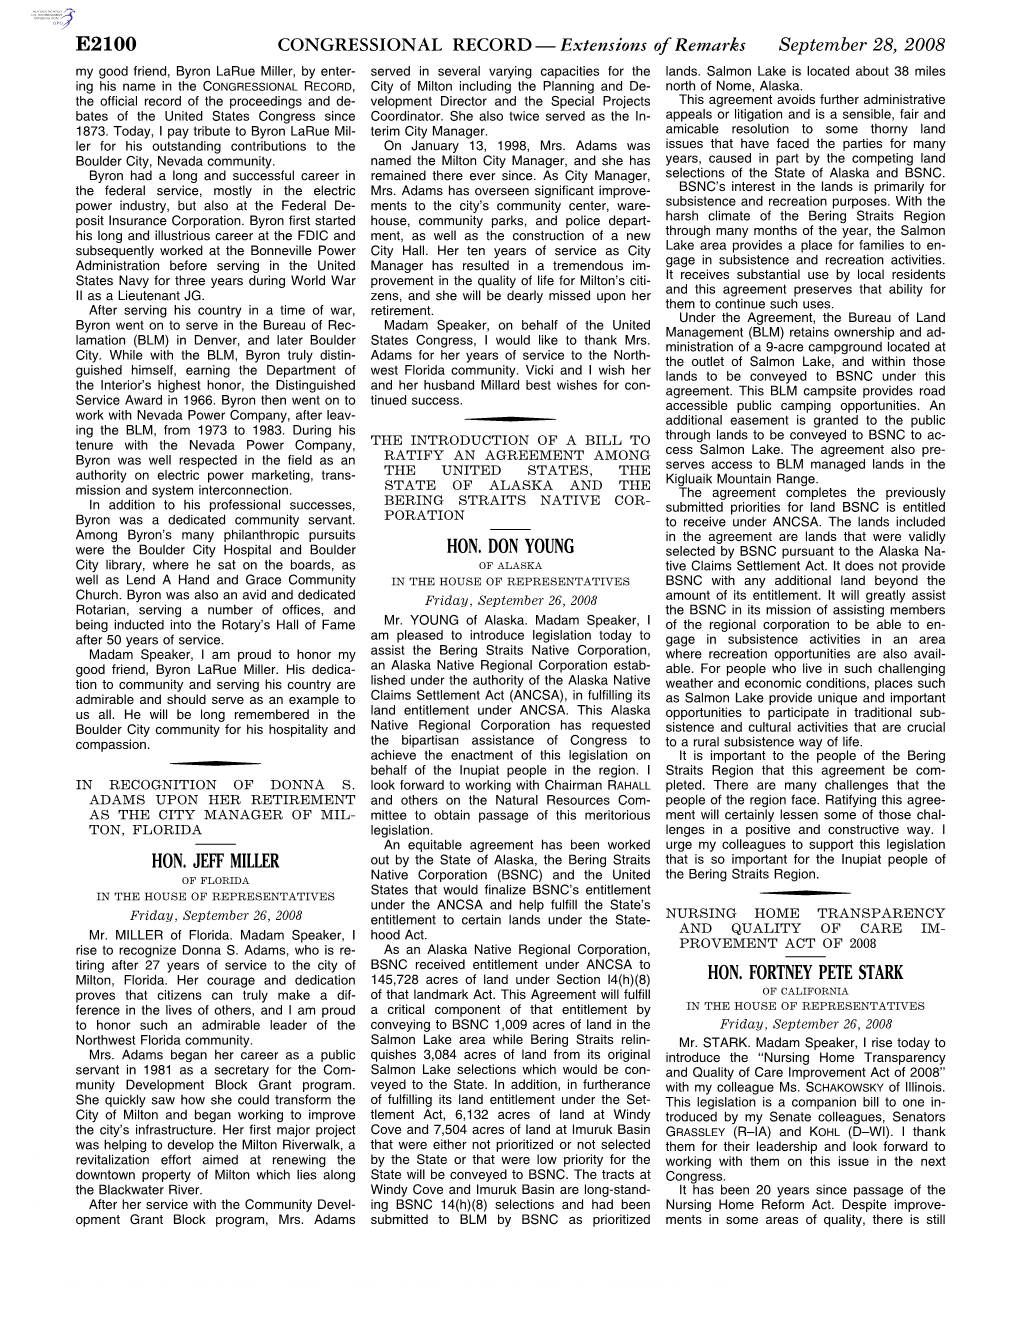 CONGRESSIONAL RECORD— Extensions of Remarks E2100 HON